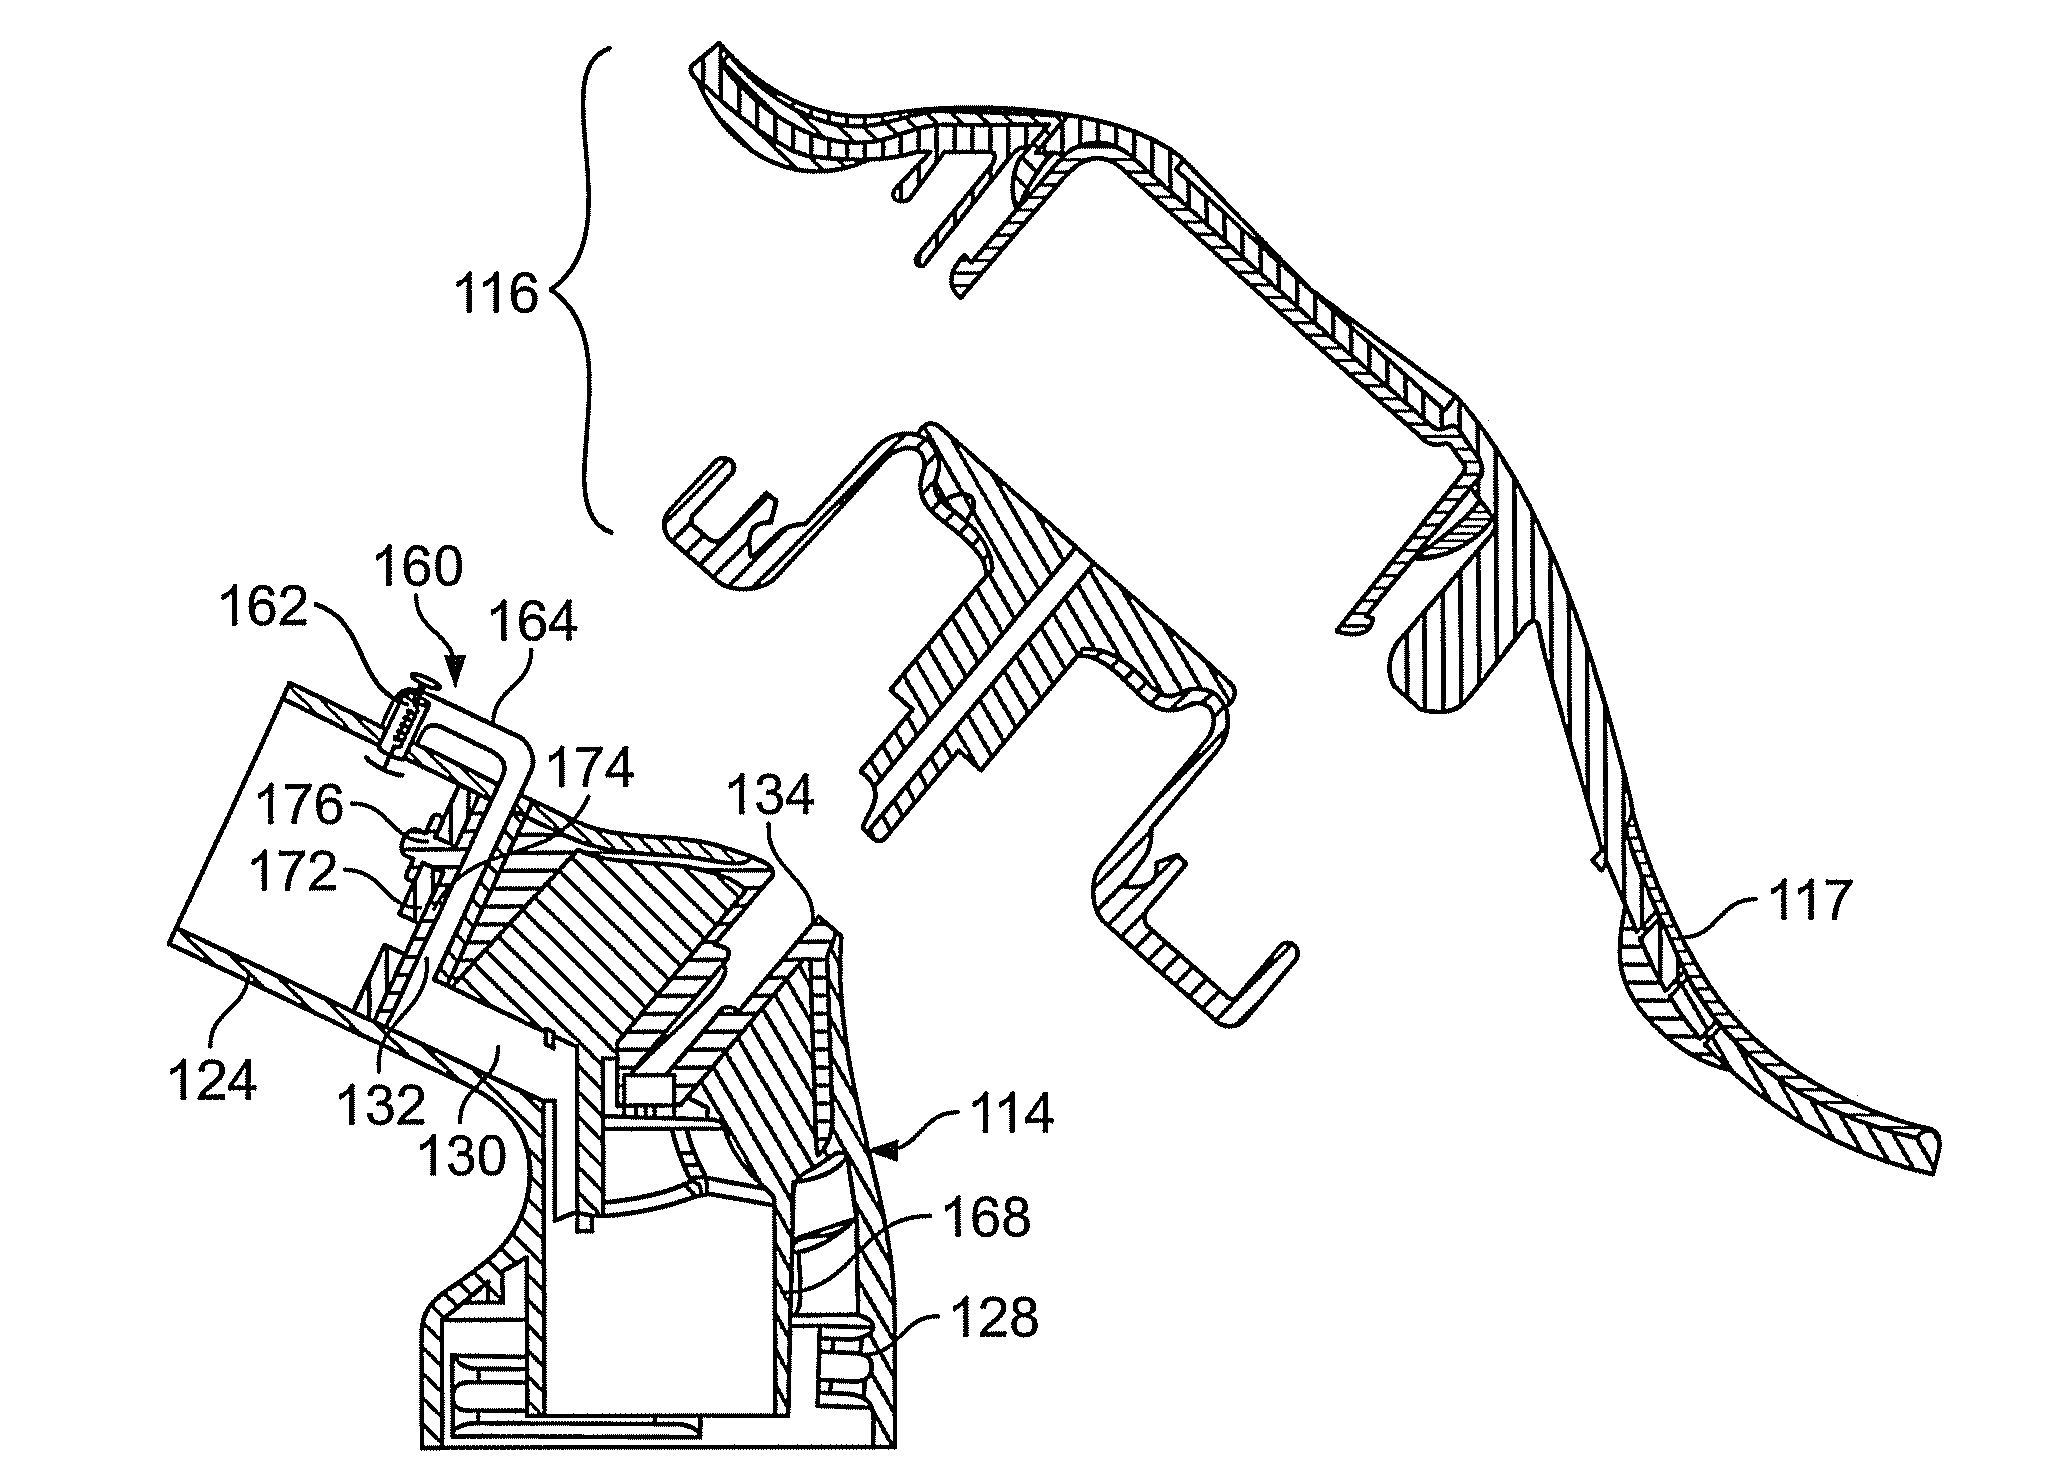 Method and Apparatus for Minimum Negative Pressure Control, Particularly for a Breastpump with Breastshield Pressure Control System